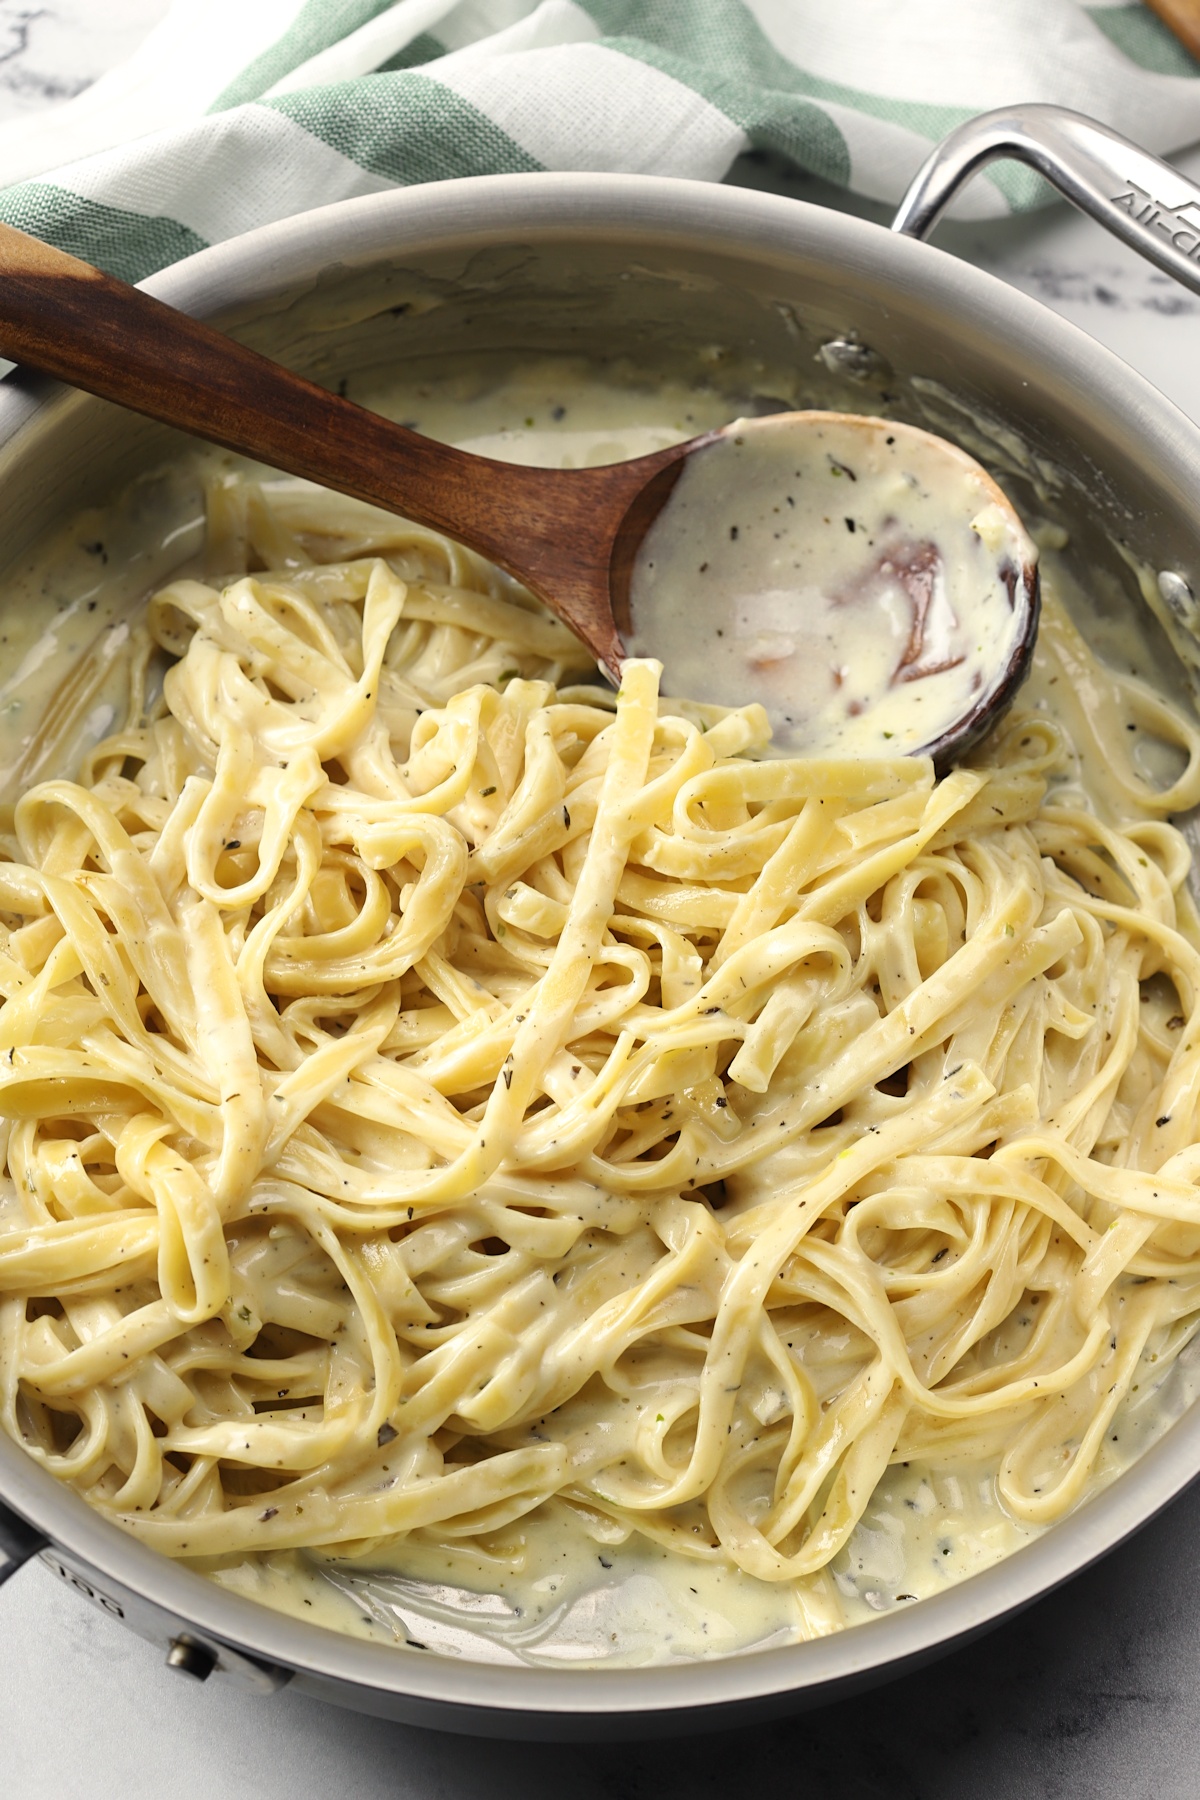 Saute pan filled with fettuccine alfredo.